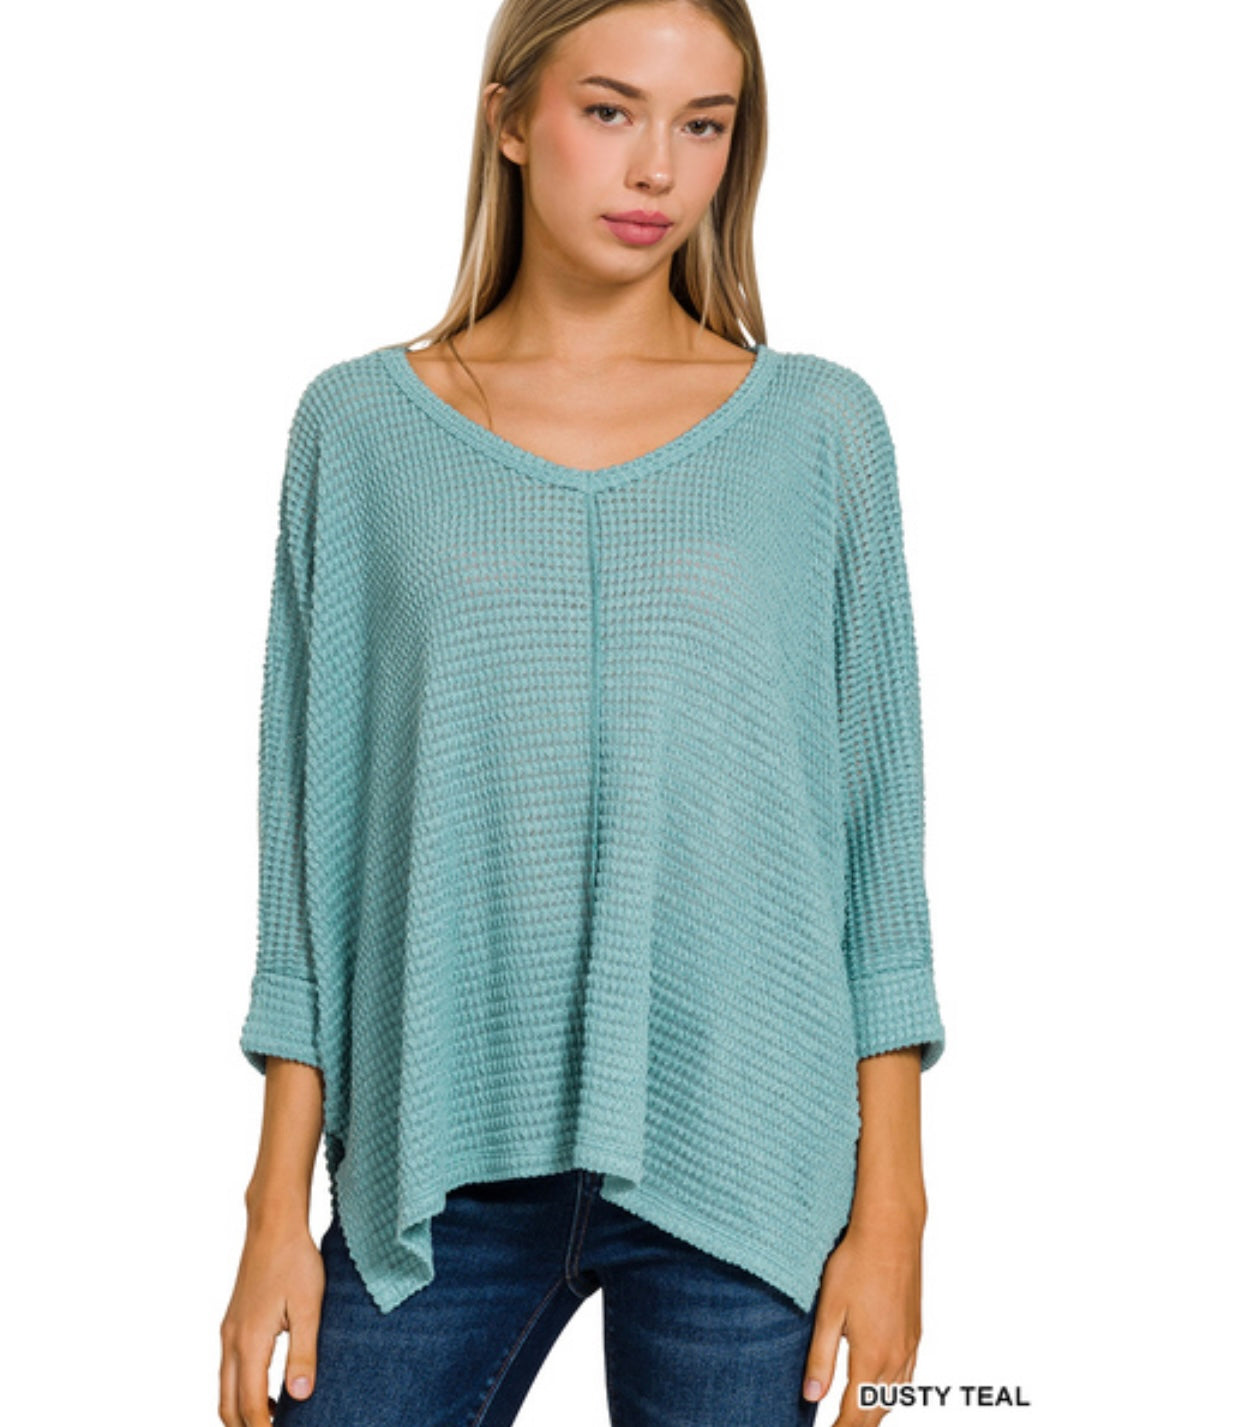 Dusty Teal V-Neck High Low Jacquard Sweater